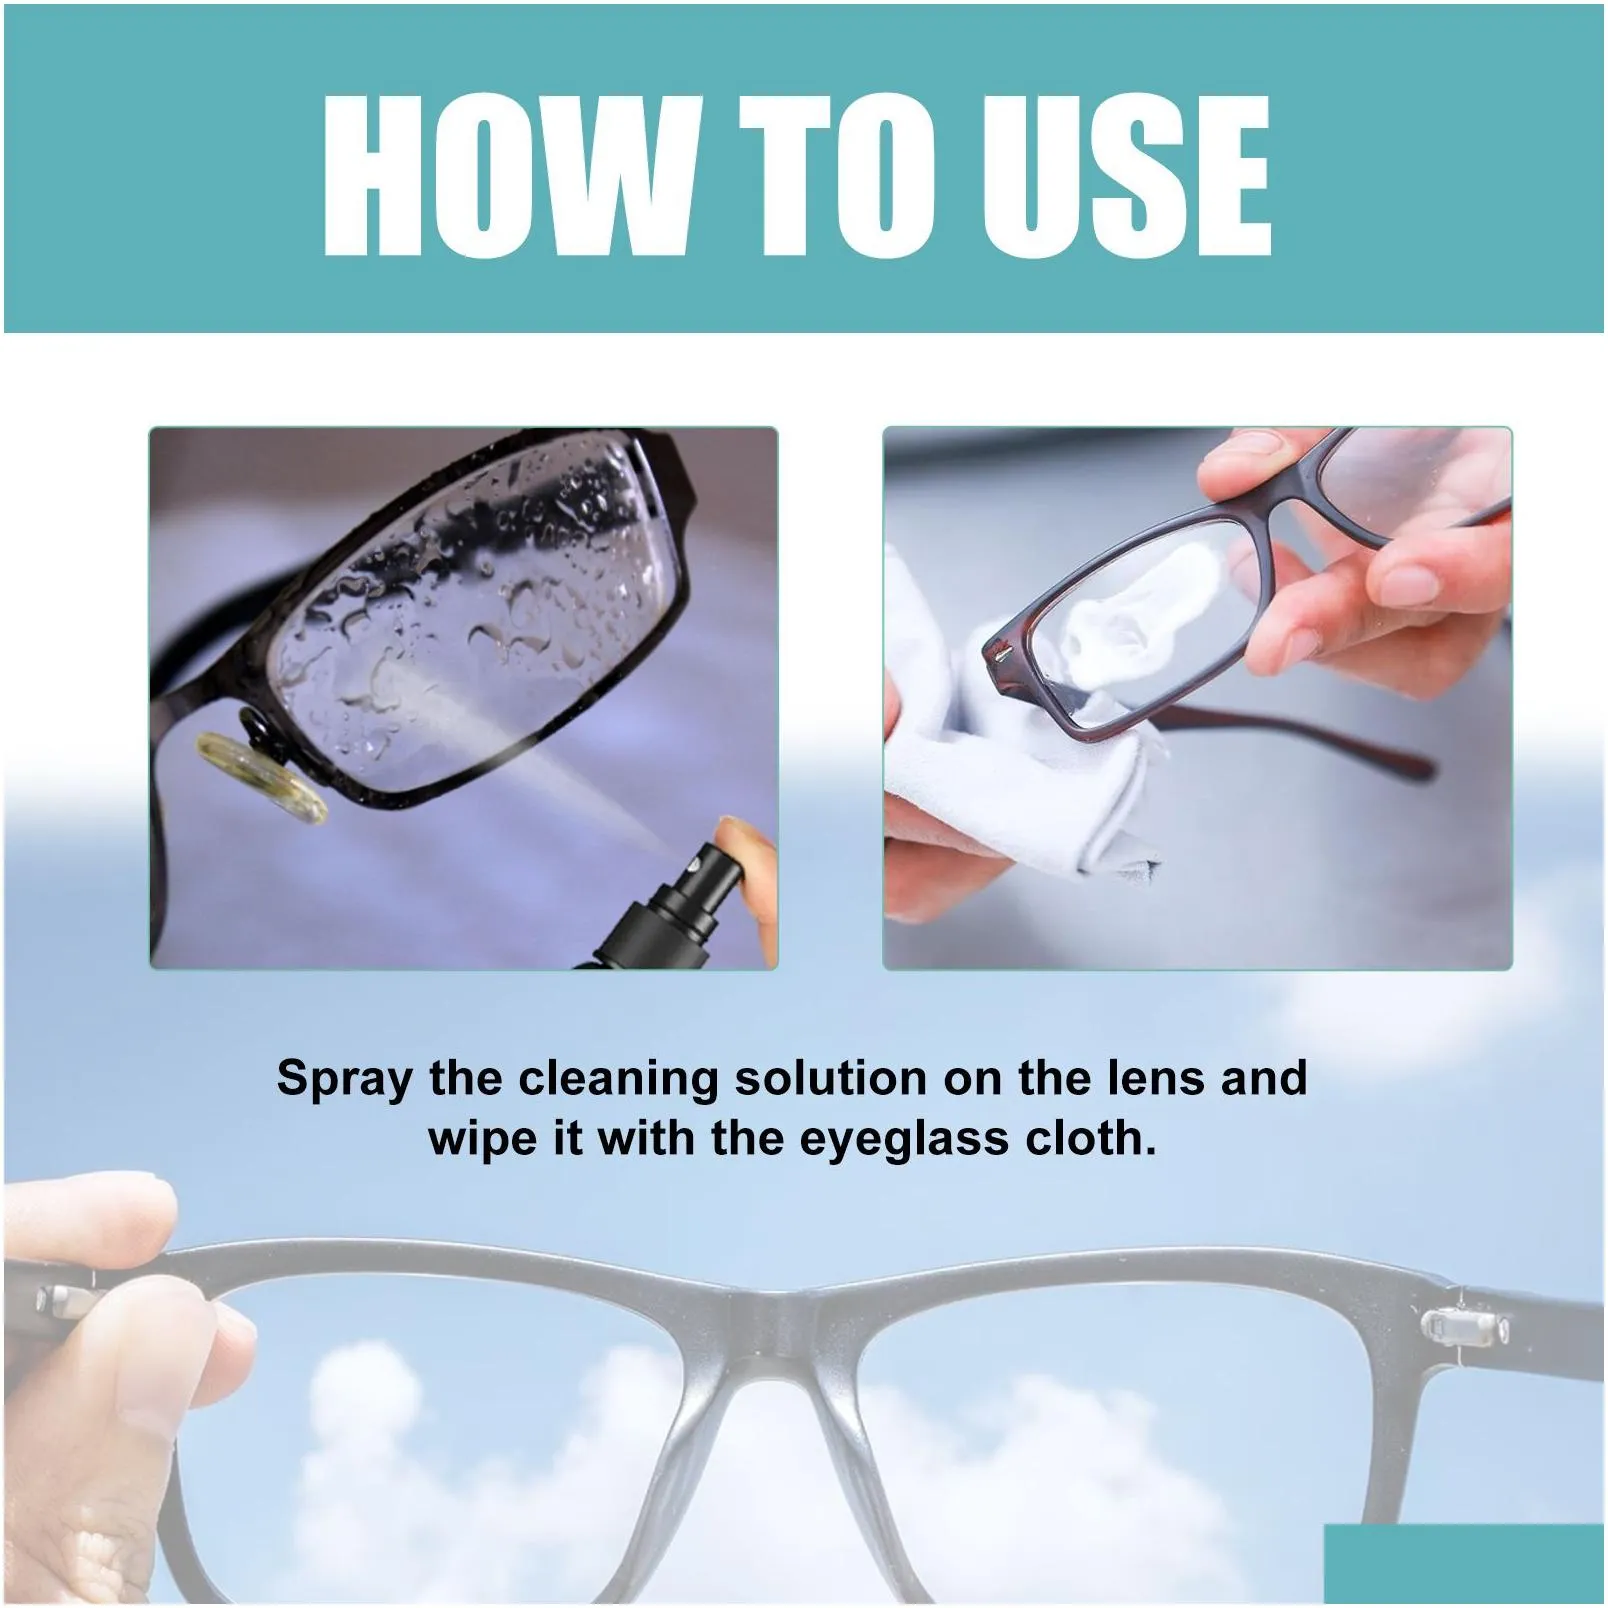 Vacuum Parts & Accessories Clear Accessories Lens Cleaning Kit Effective Eyeglass Tool Powerf Home Garden Housekeeping Organization Cl Dh5Nb